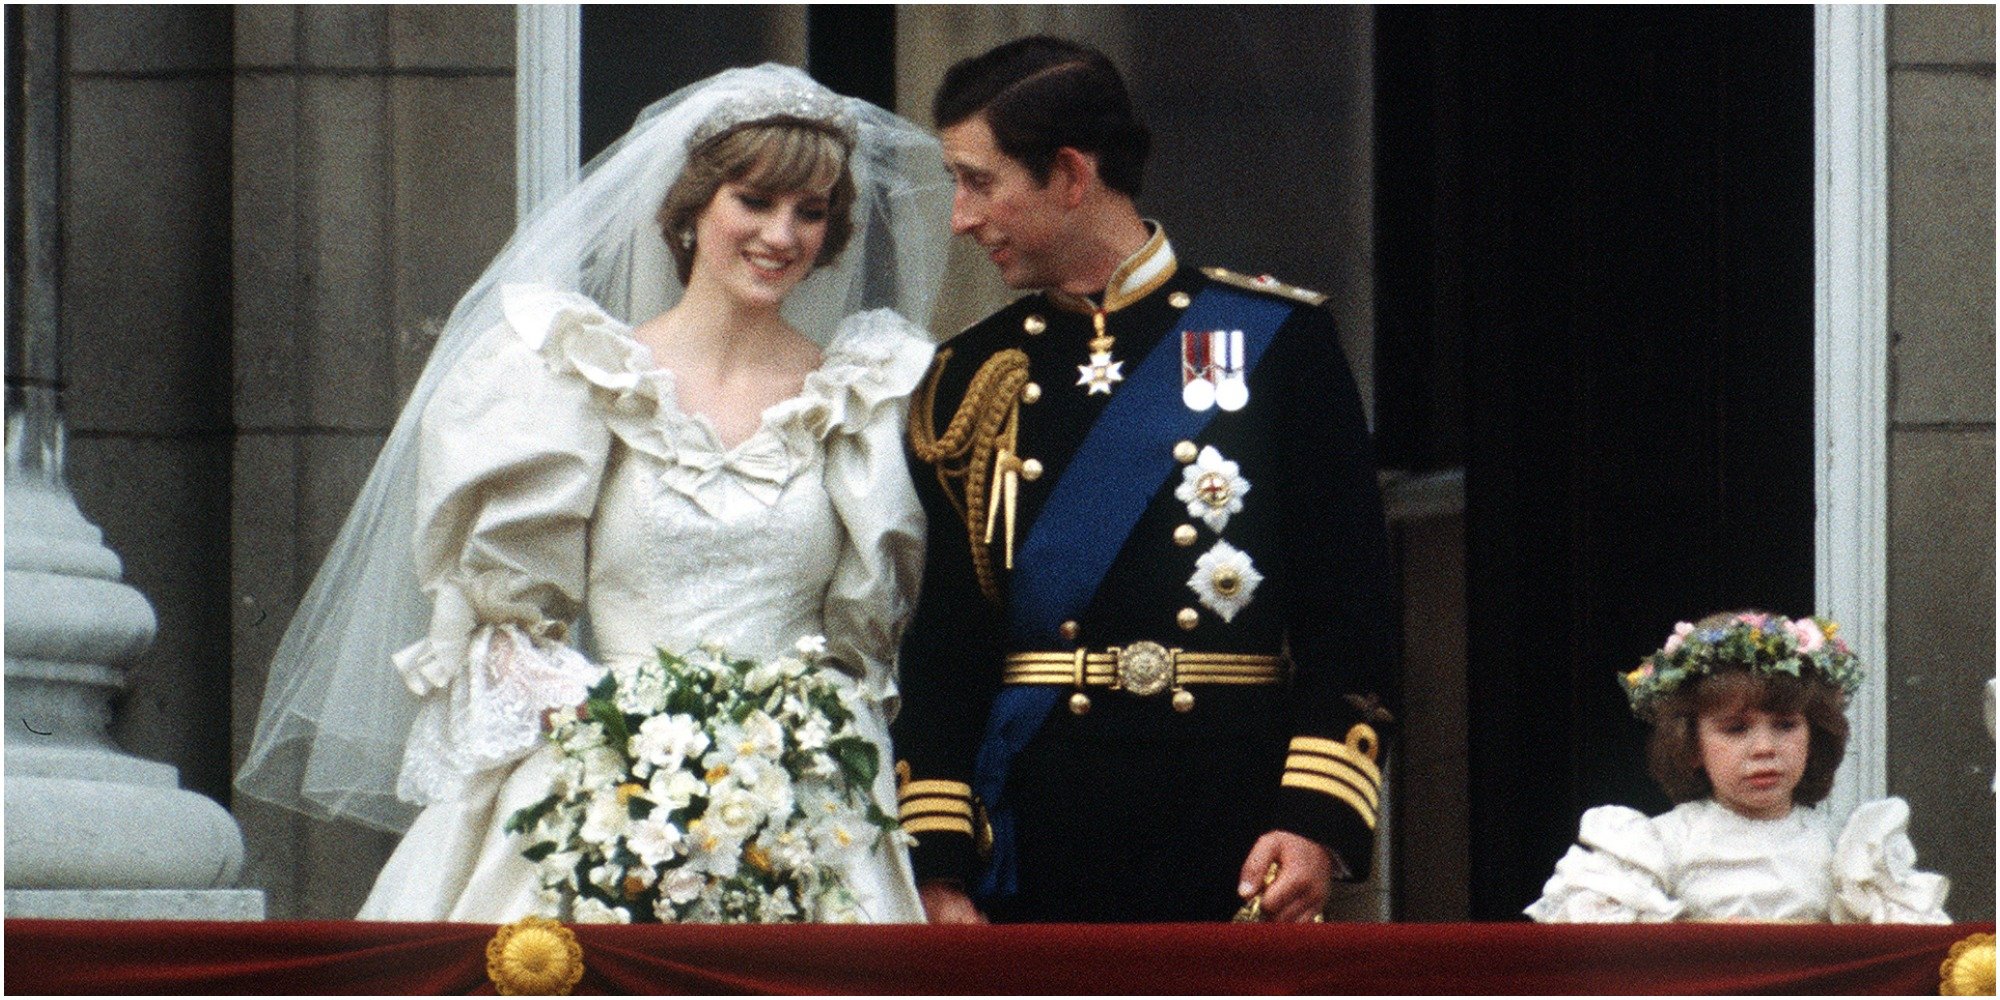 Princess Diana and Prince Charles on their wedding day in July 1981.